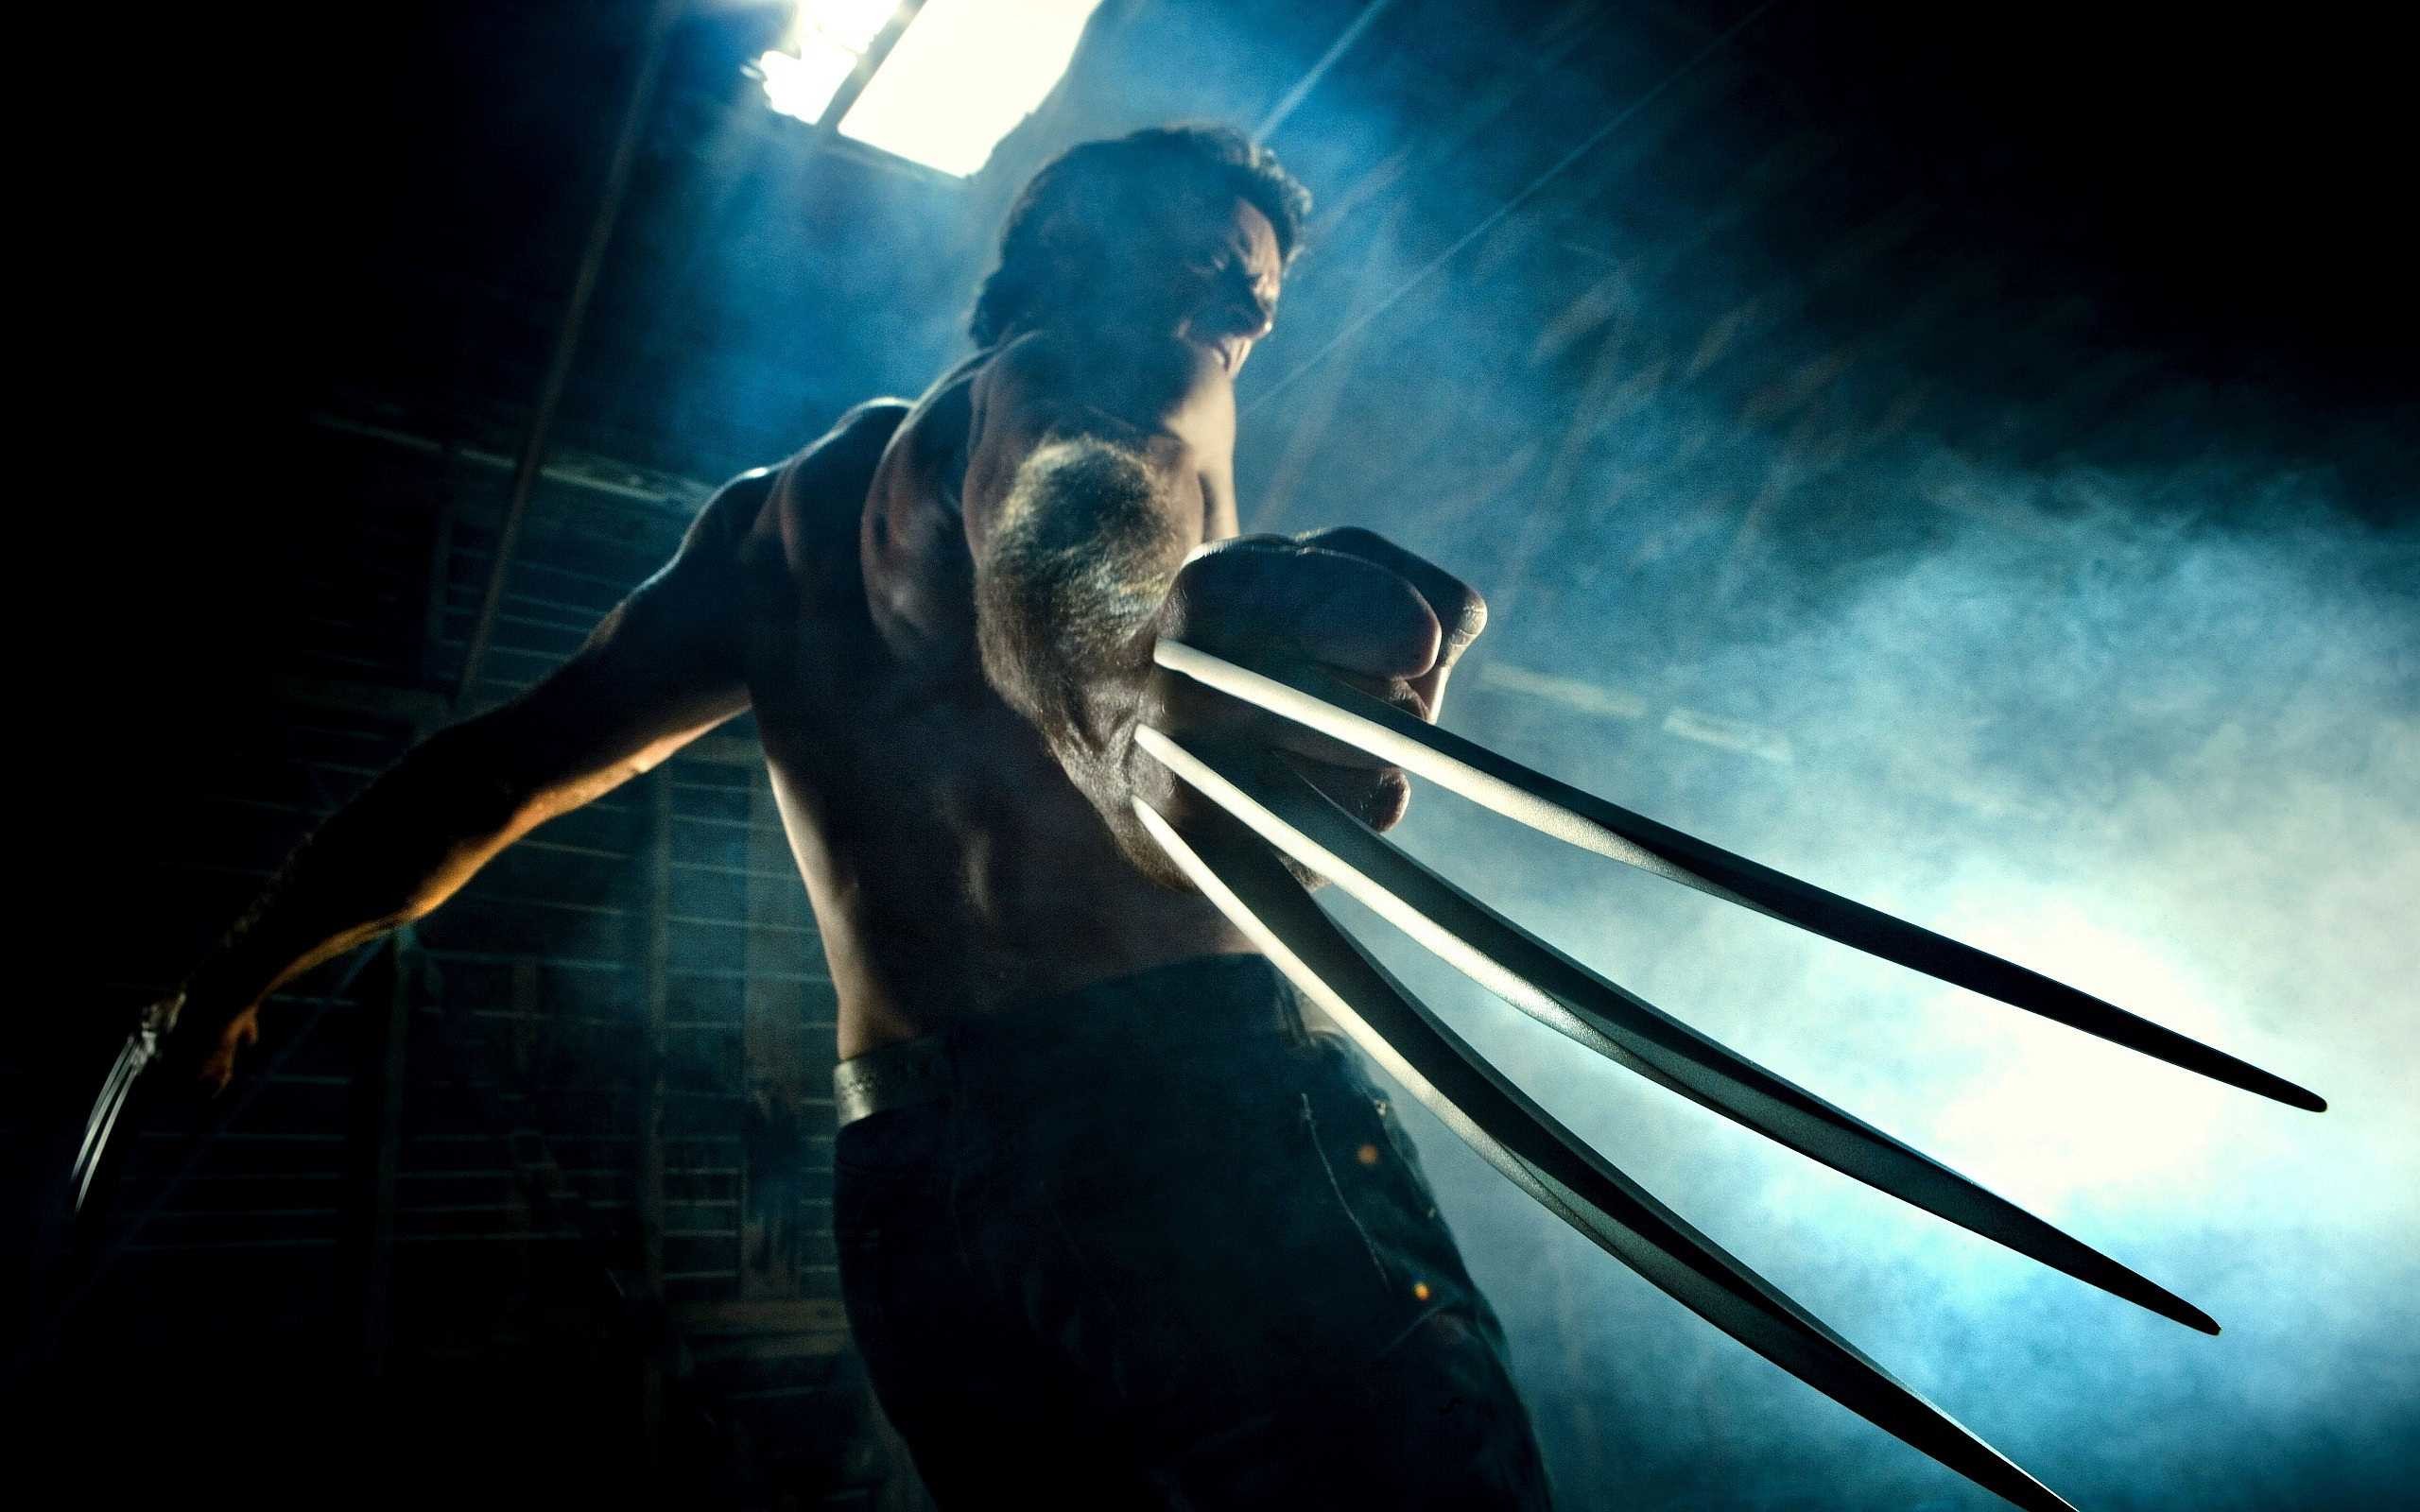 Logan 2017 Poster HD wallpaper 2016 for FREE. Download Desktop Backgrounds in category Logan Wolverine for Fullscreen PC, mobile, iPhone